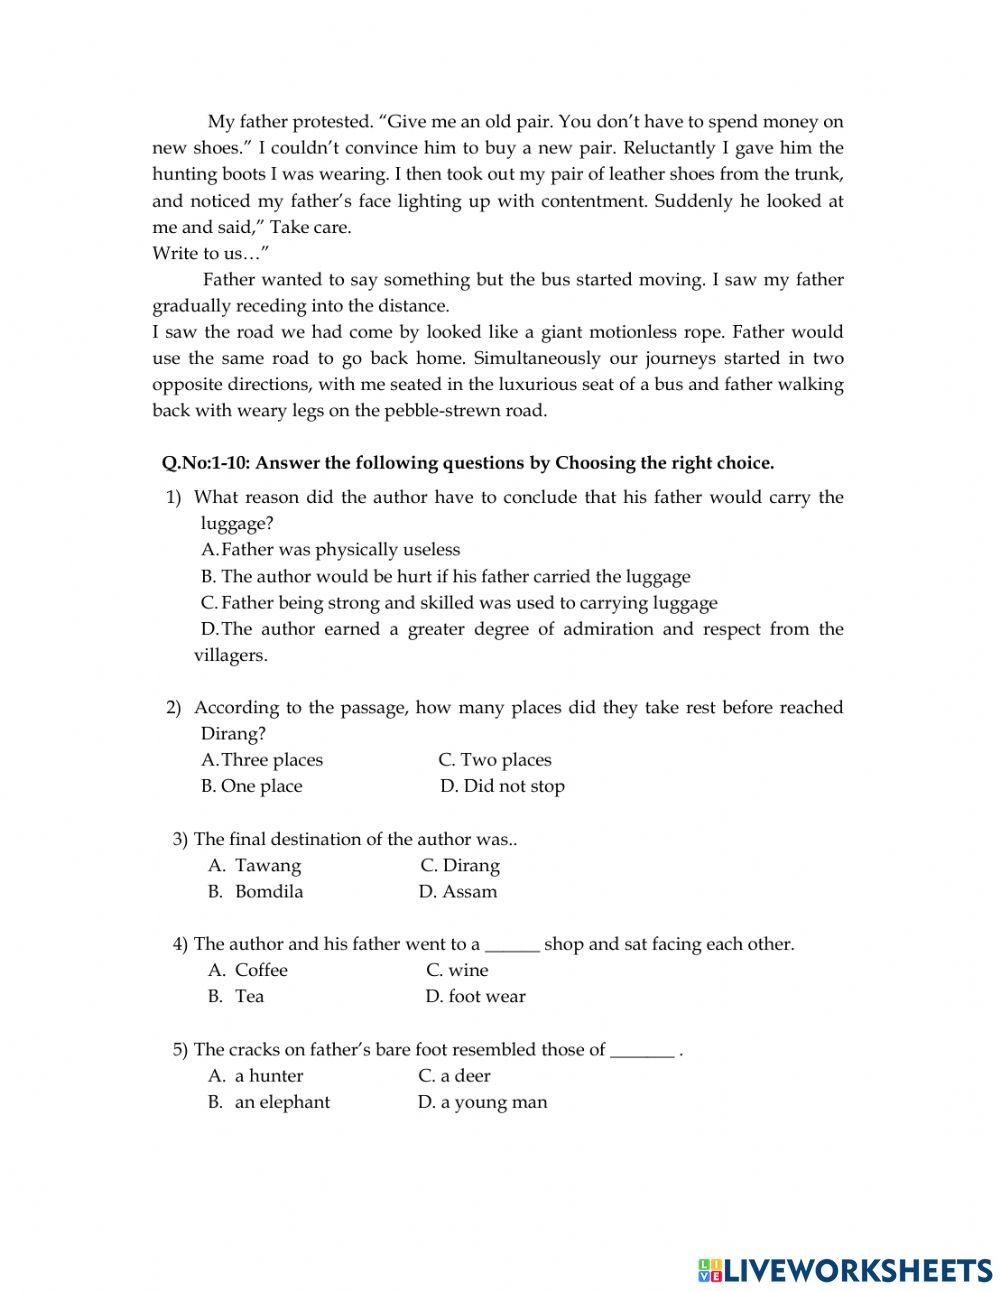 Class X: worksheet 7 in unit-3 Reading.A